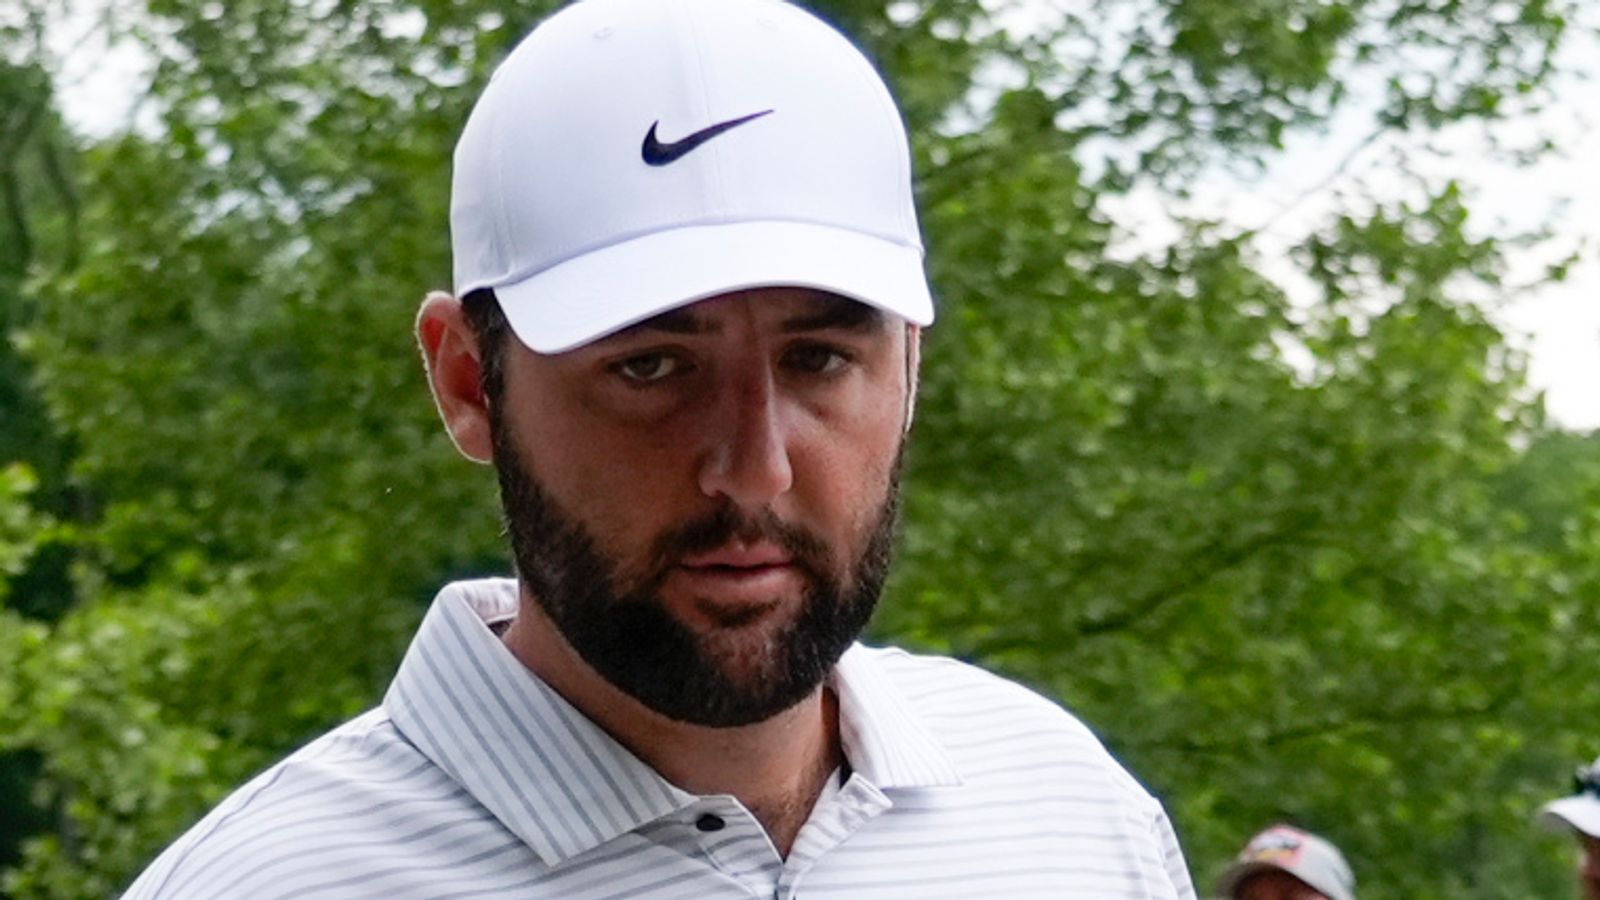 Scottie Scheffler stopped by authorities during second round of PGA Championship | Golf News